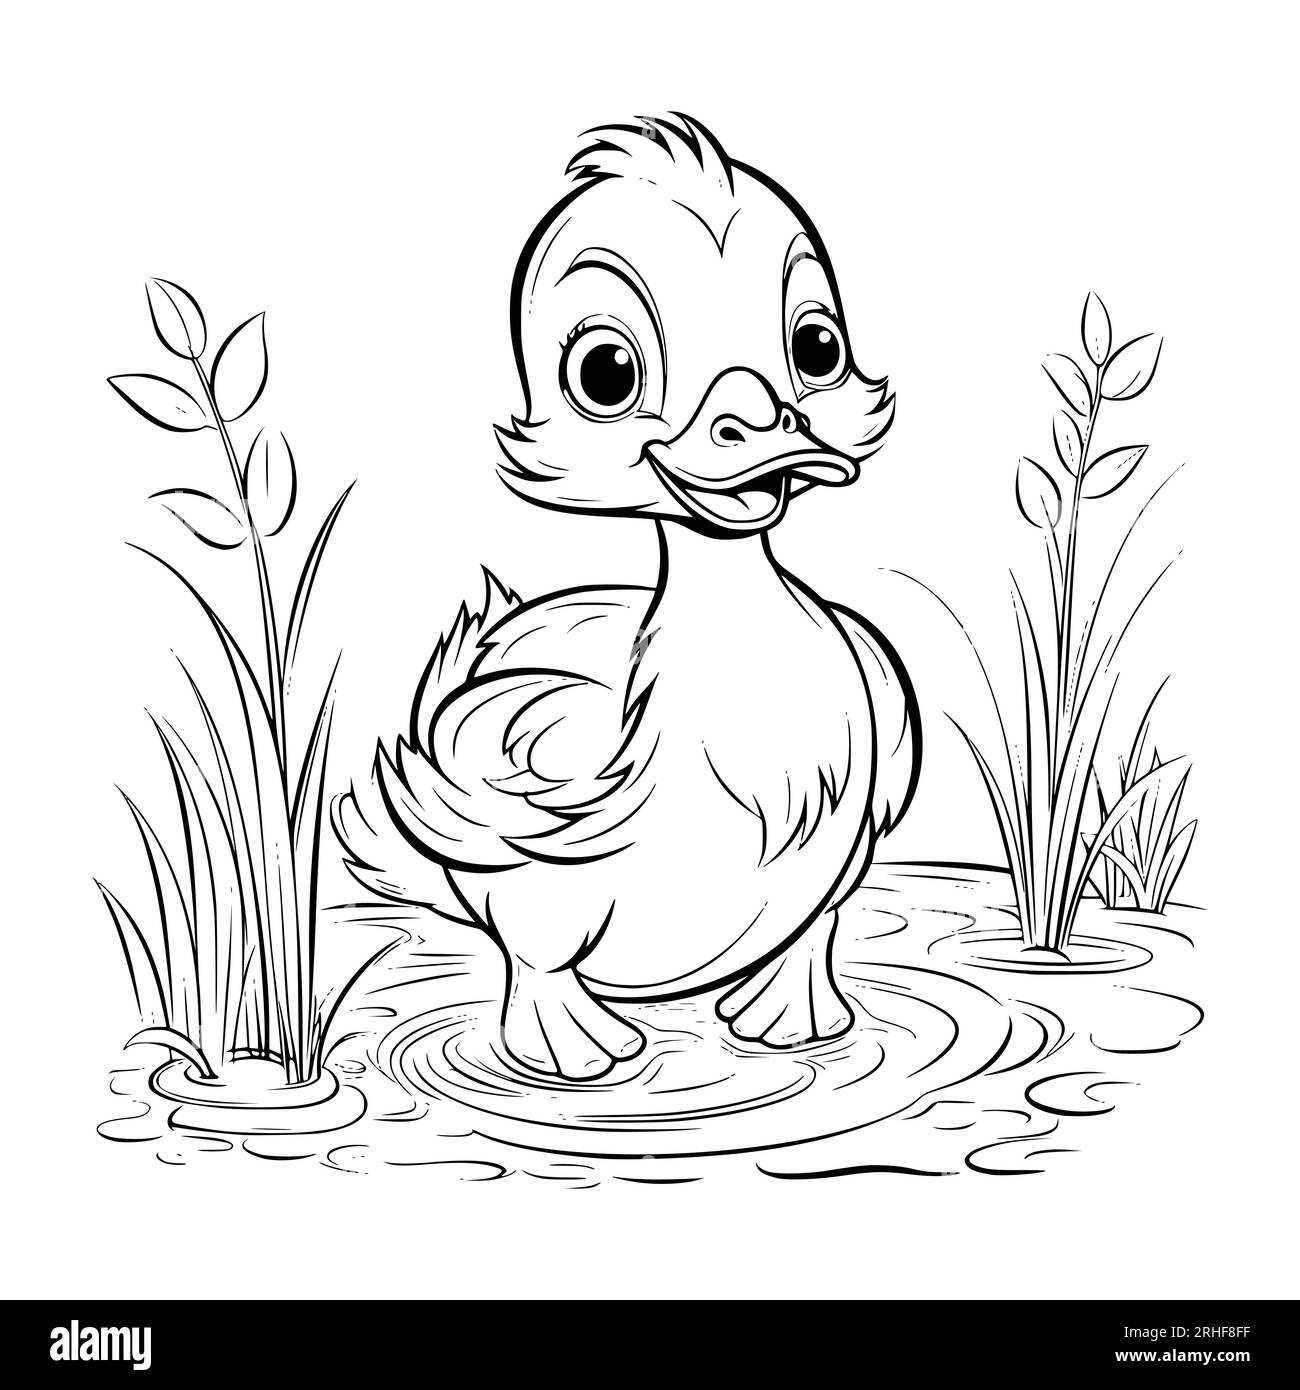 Rubber Duck Drawing - How To Draw A Rubber Duck Step By Step